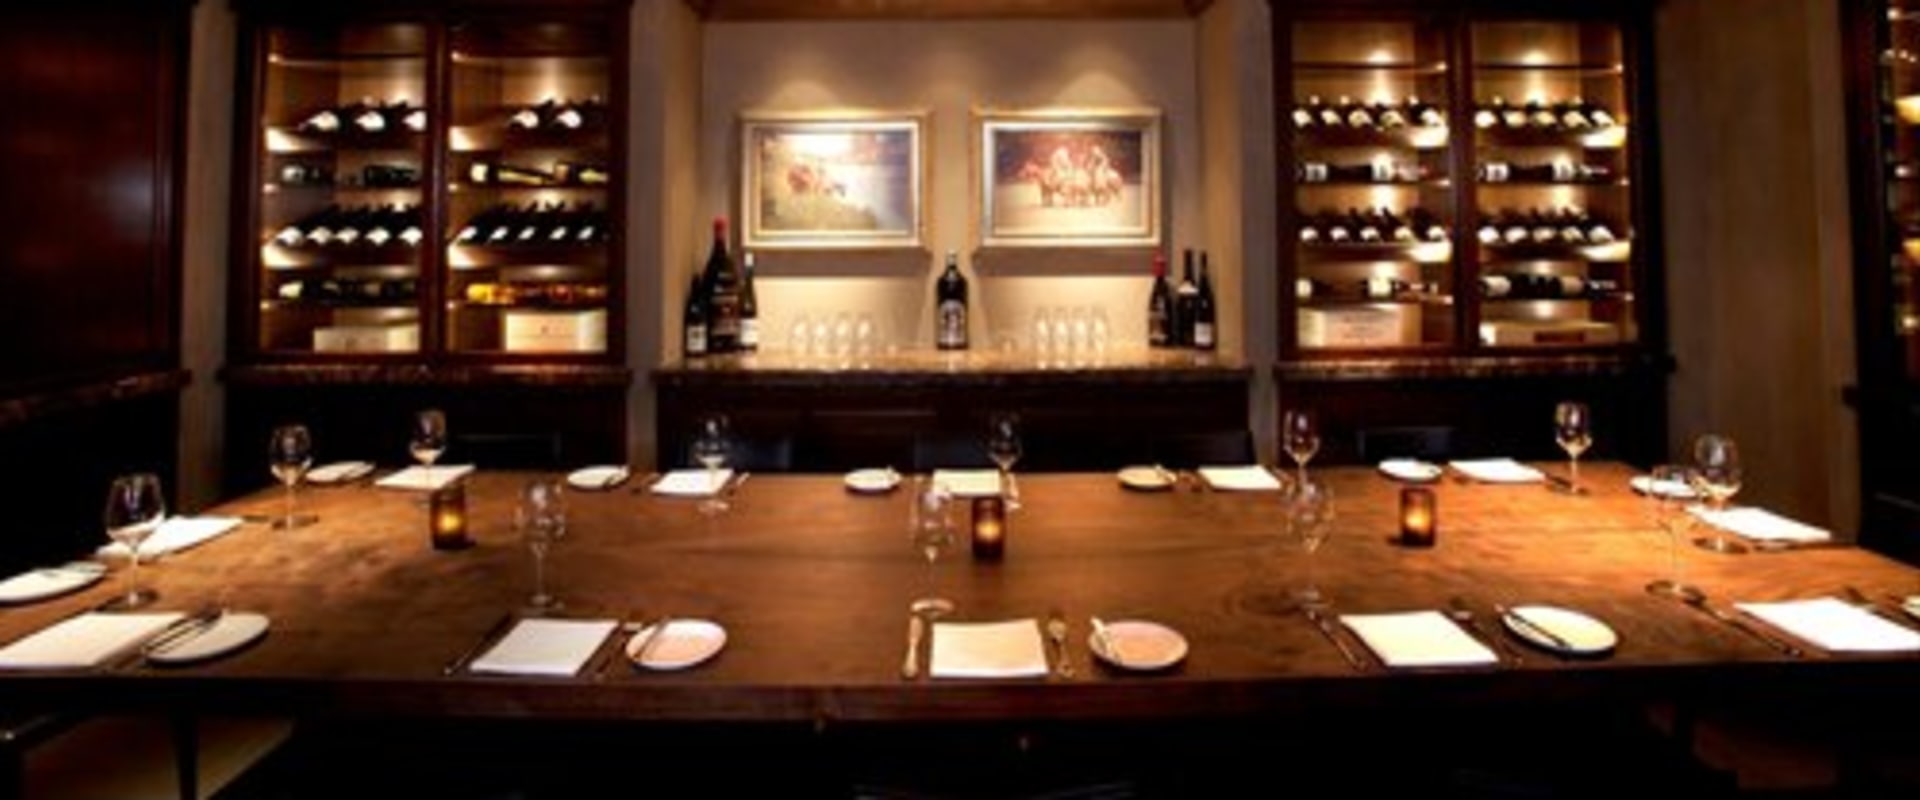 The Top Private Dining Restaurants in Orange County, CA